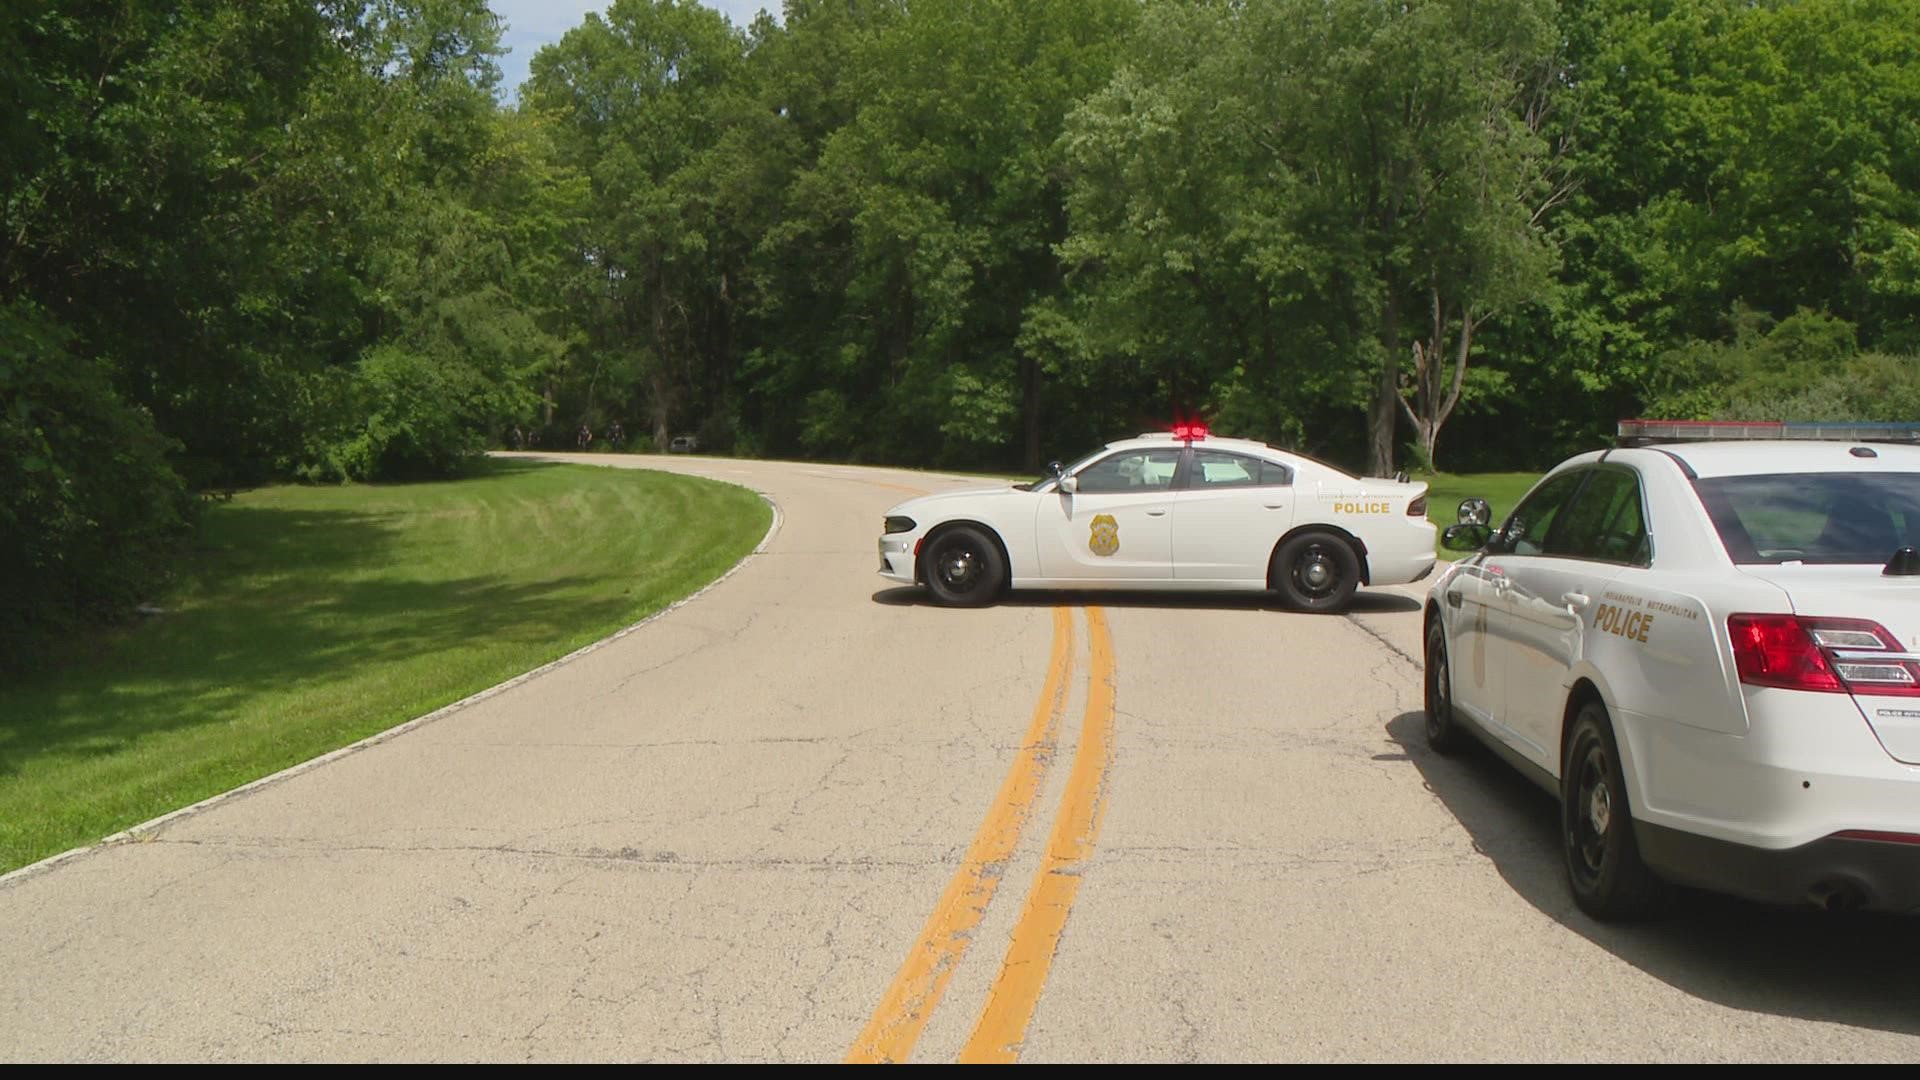 IMPD is investigating after a body was found burned in Pike Township in a wooded area near Eagle Creek.